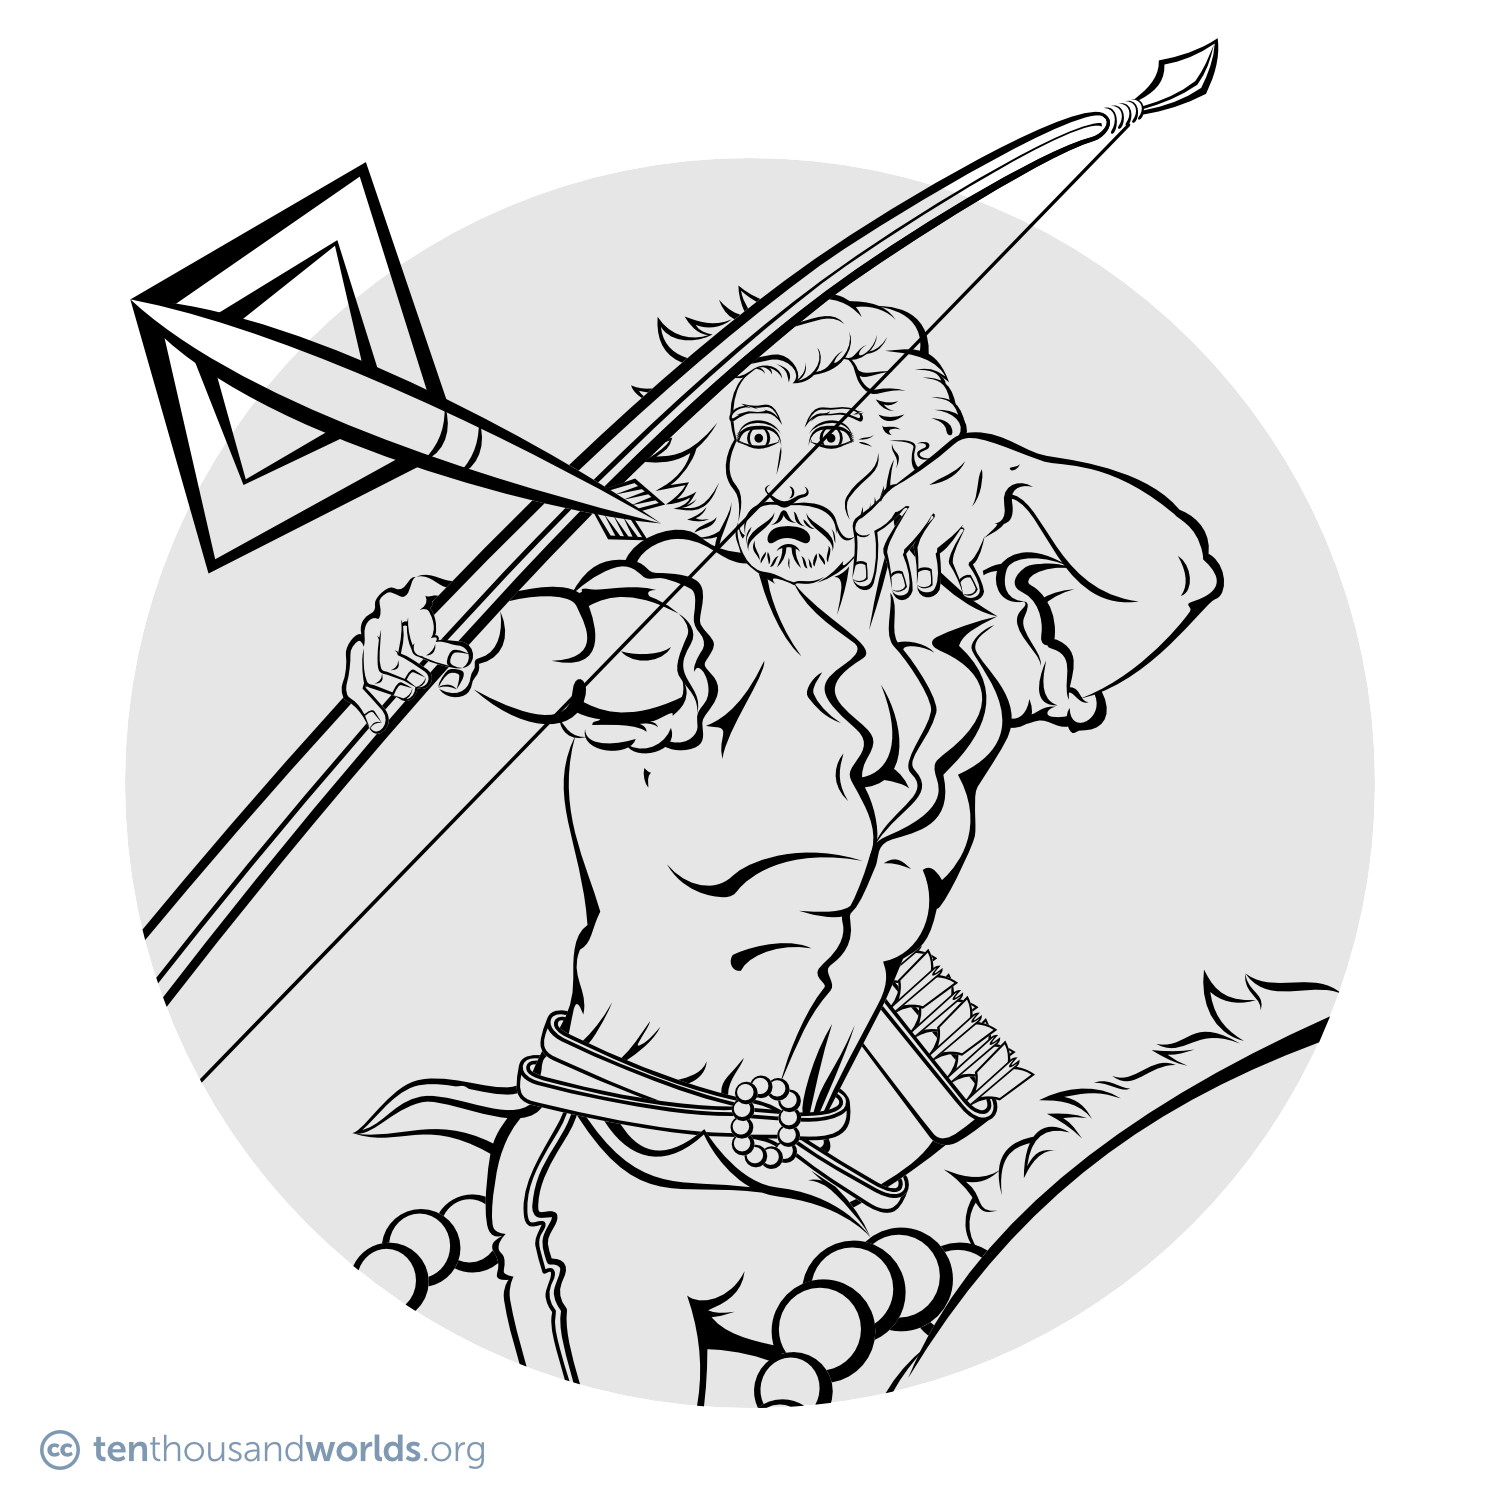 An ink outline of a man firing an arrow from a bow while riding a horse.